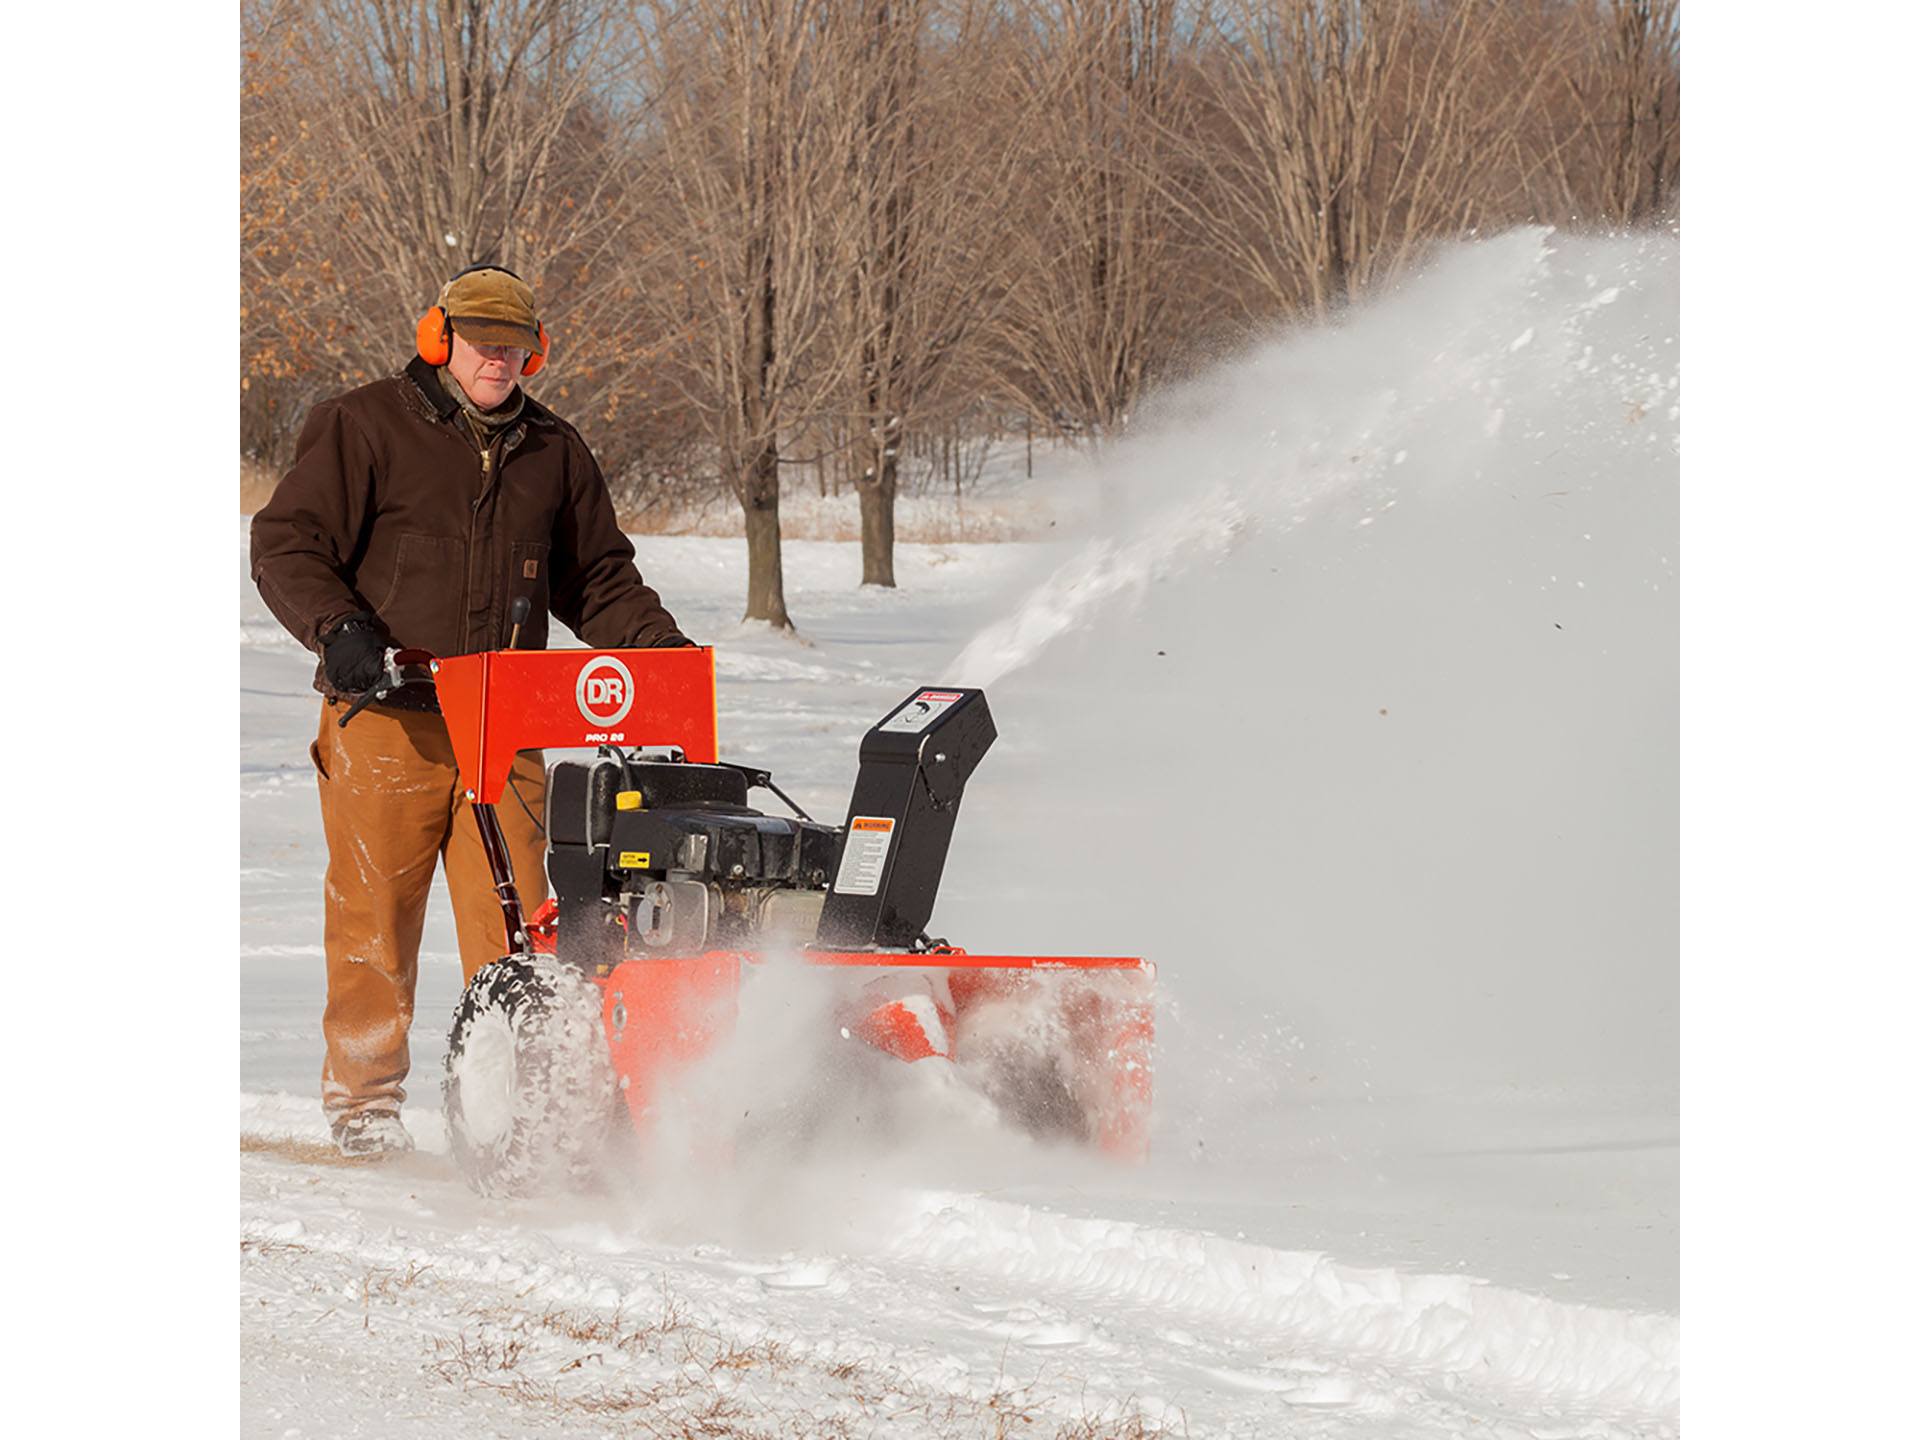 DR Power Equipment Snow Thrower Attachment in Thief River Falls, Minnesota - Photo 2